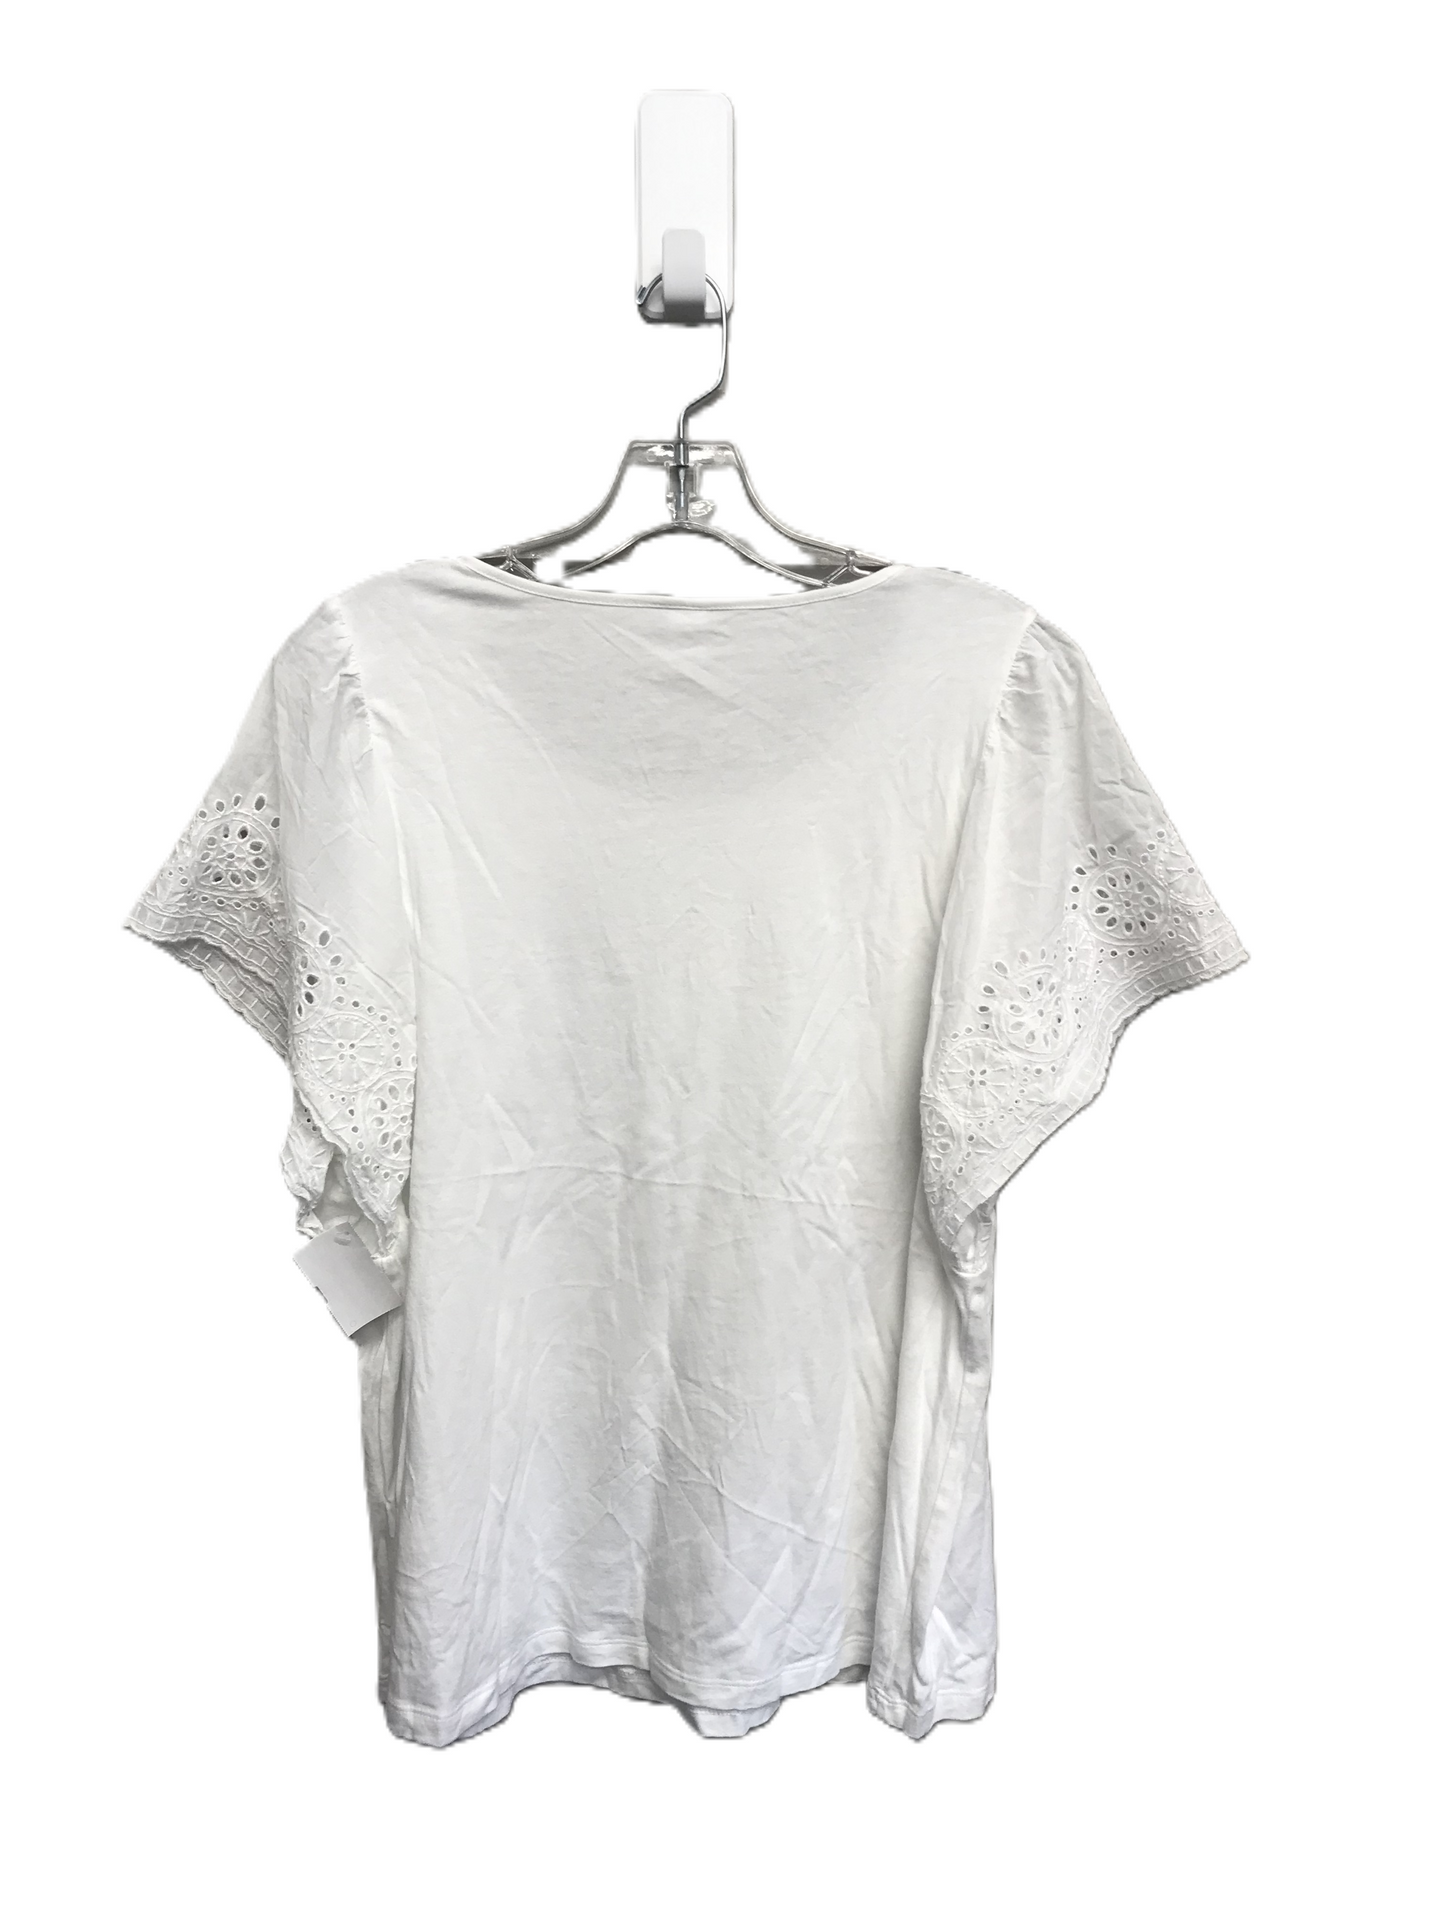 White Top Short Sleeve Basic By Old Navy, Size: Xl